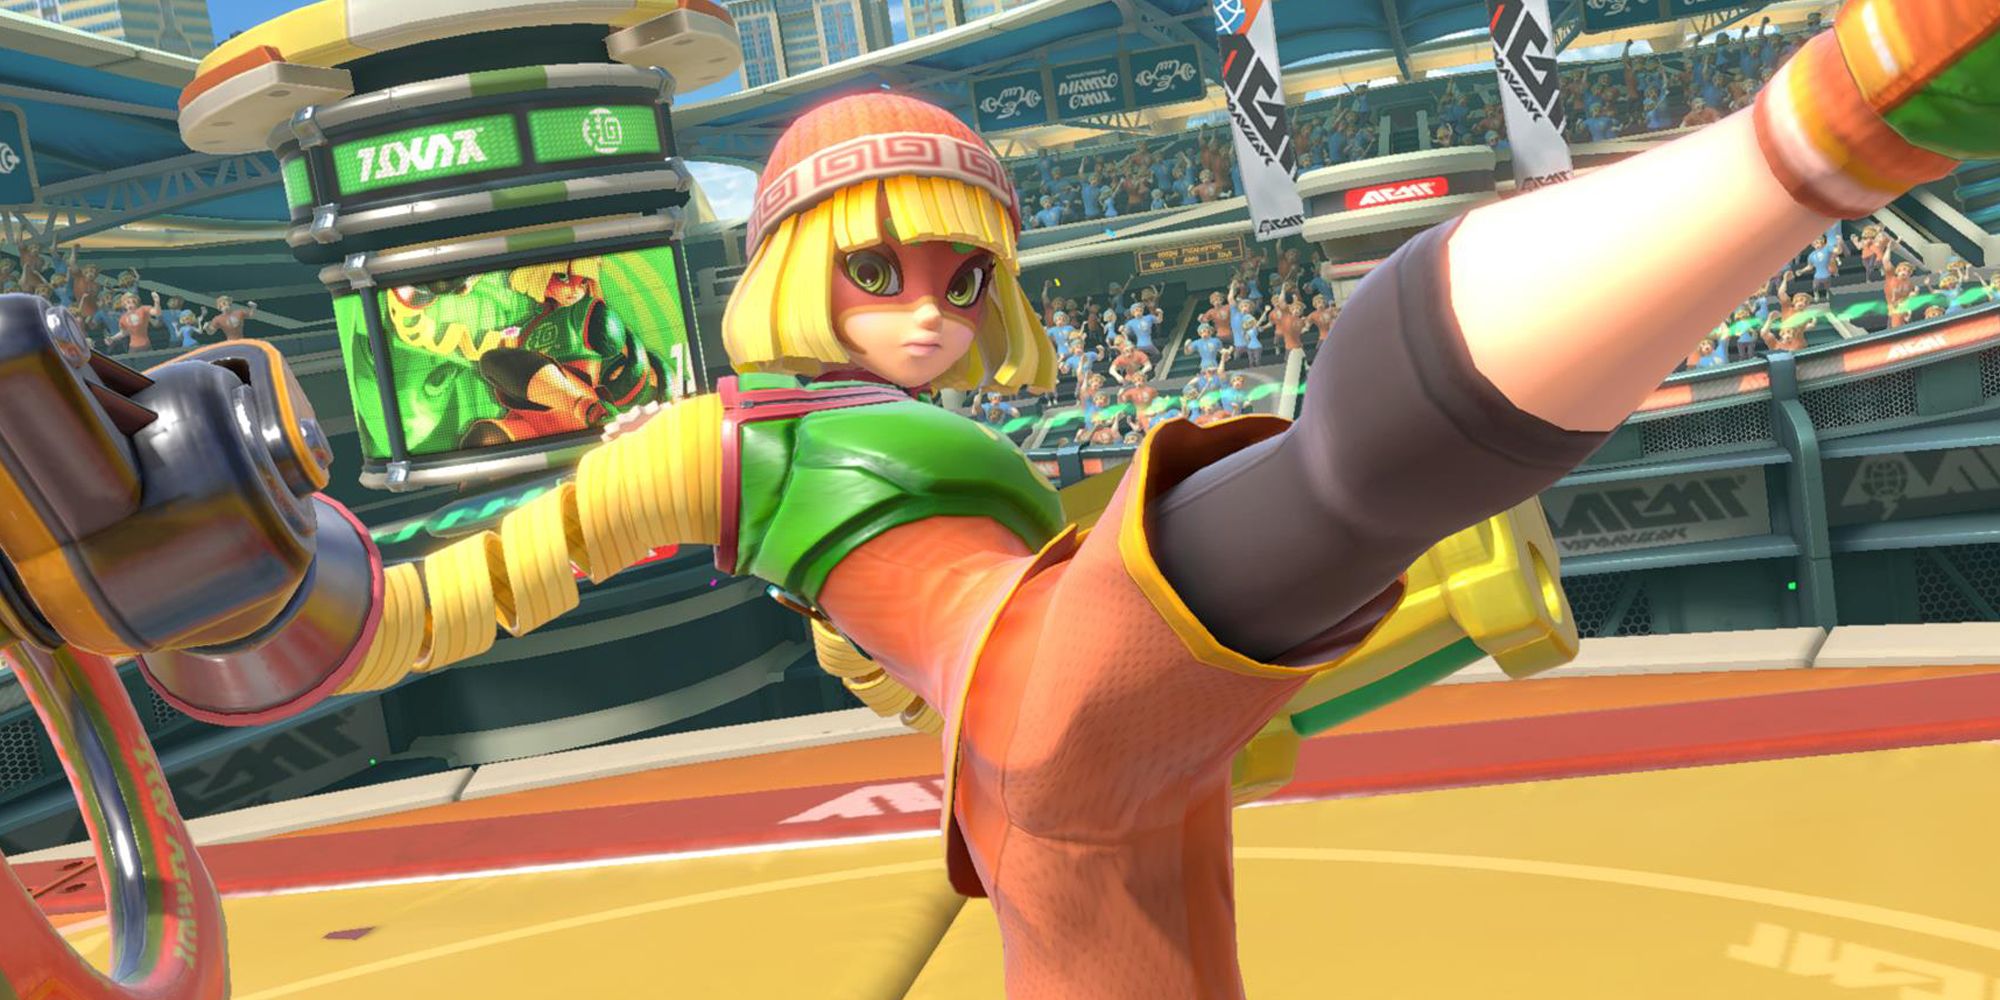 The character Min Min competes in the Smash Bros Tournament.